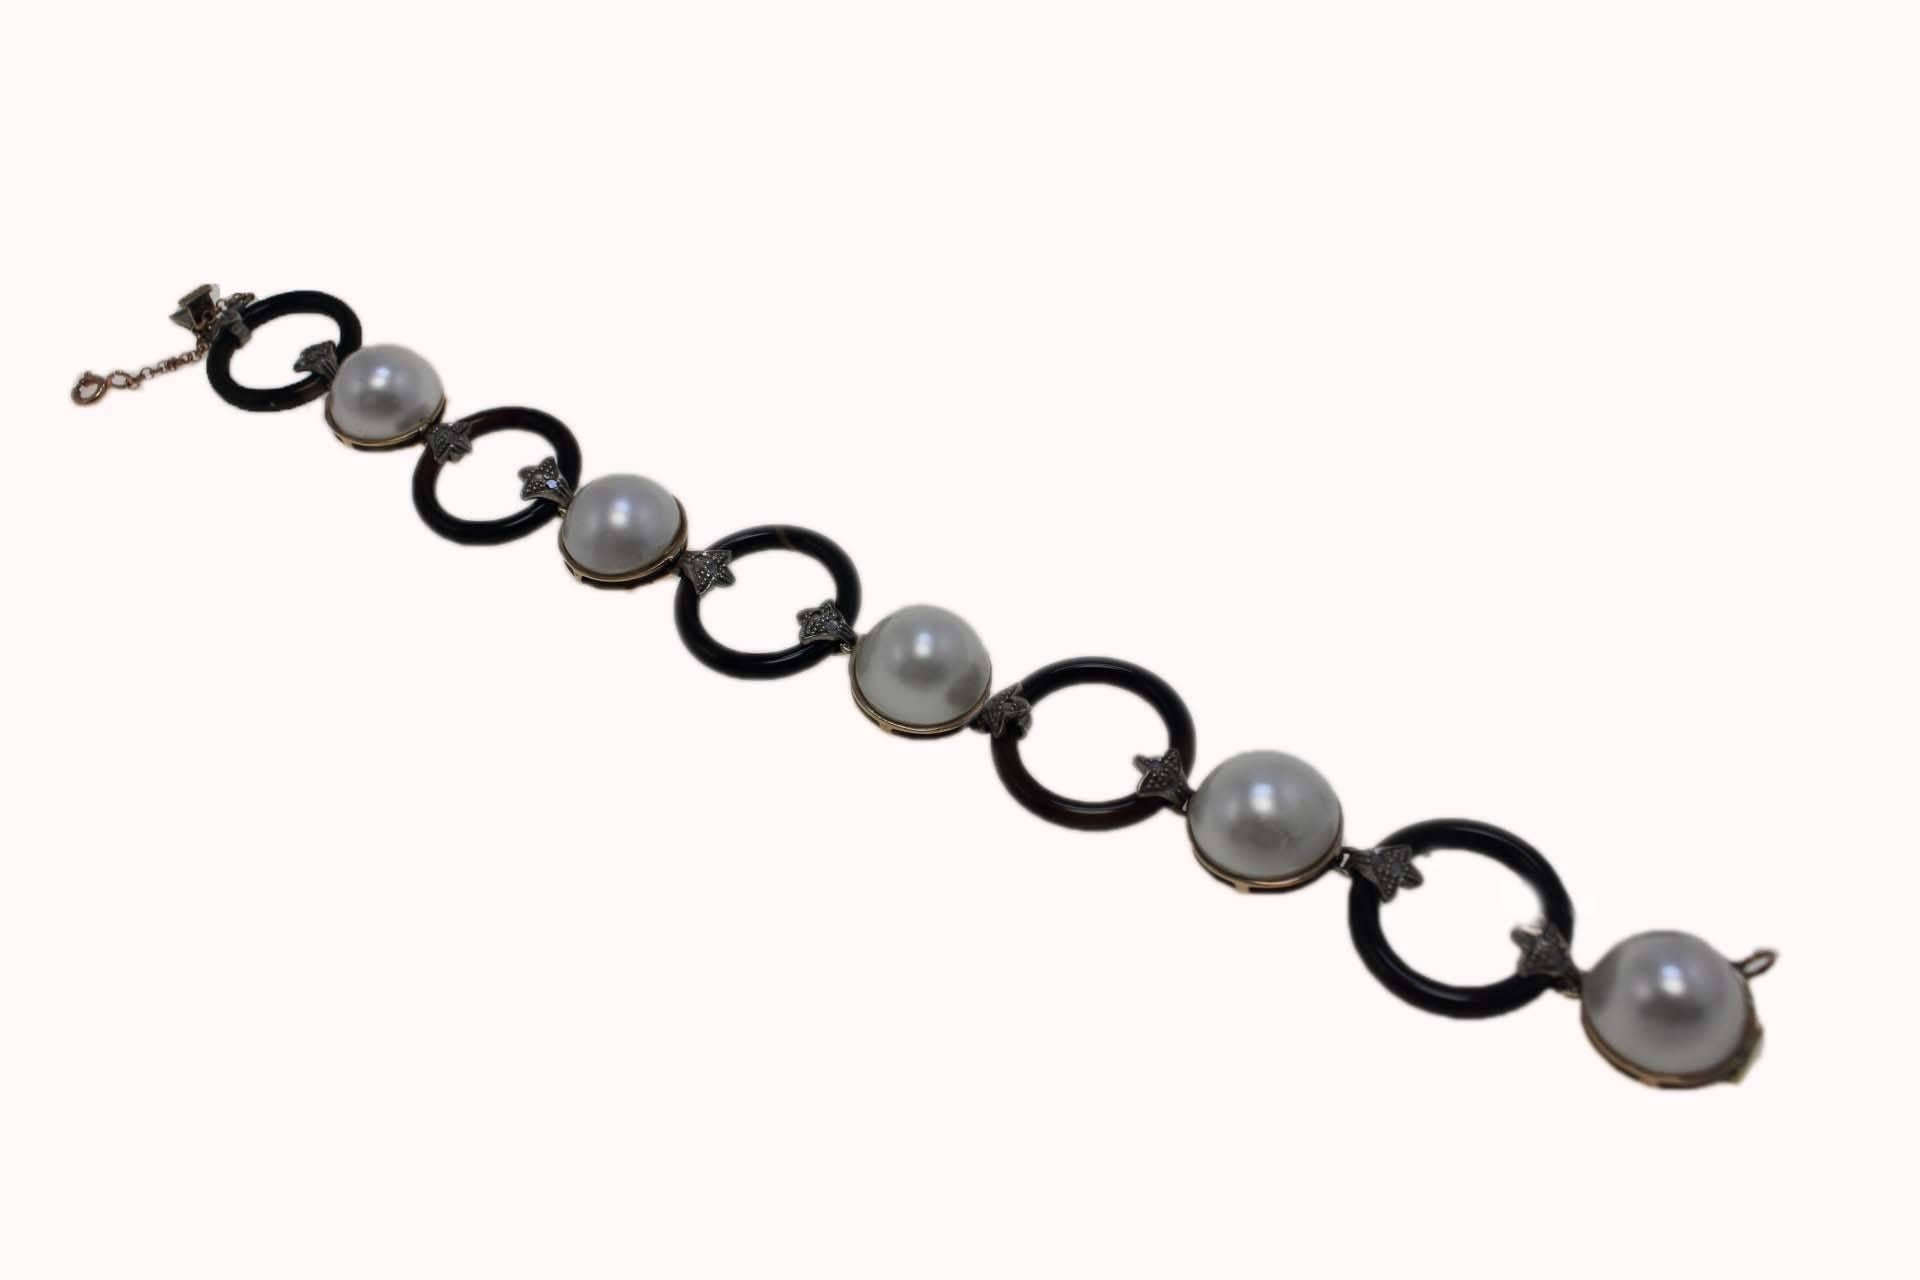 Classic and elegant link bracelet compose of circle of onyx  alternating with pearls and linked trough diamonds leaves. All is mounted in 9 Kt rose gold and silver.
Tot weight 22.3 g
Diamonds 0.17 ct
Pearls 5.43 g diameter 13/14 mm
Onyx 5.50 g

Rf.